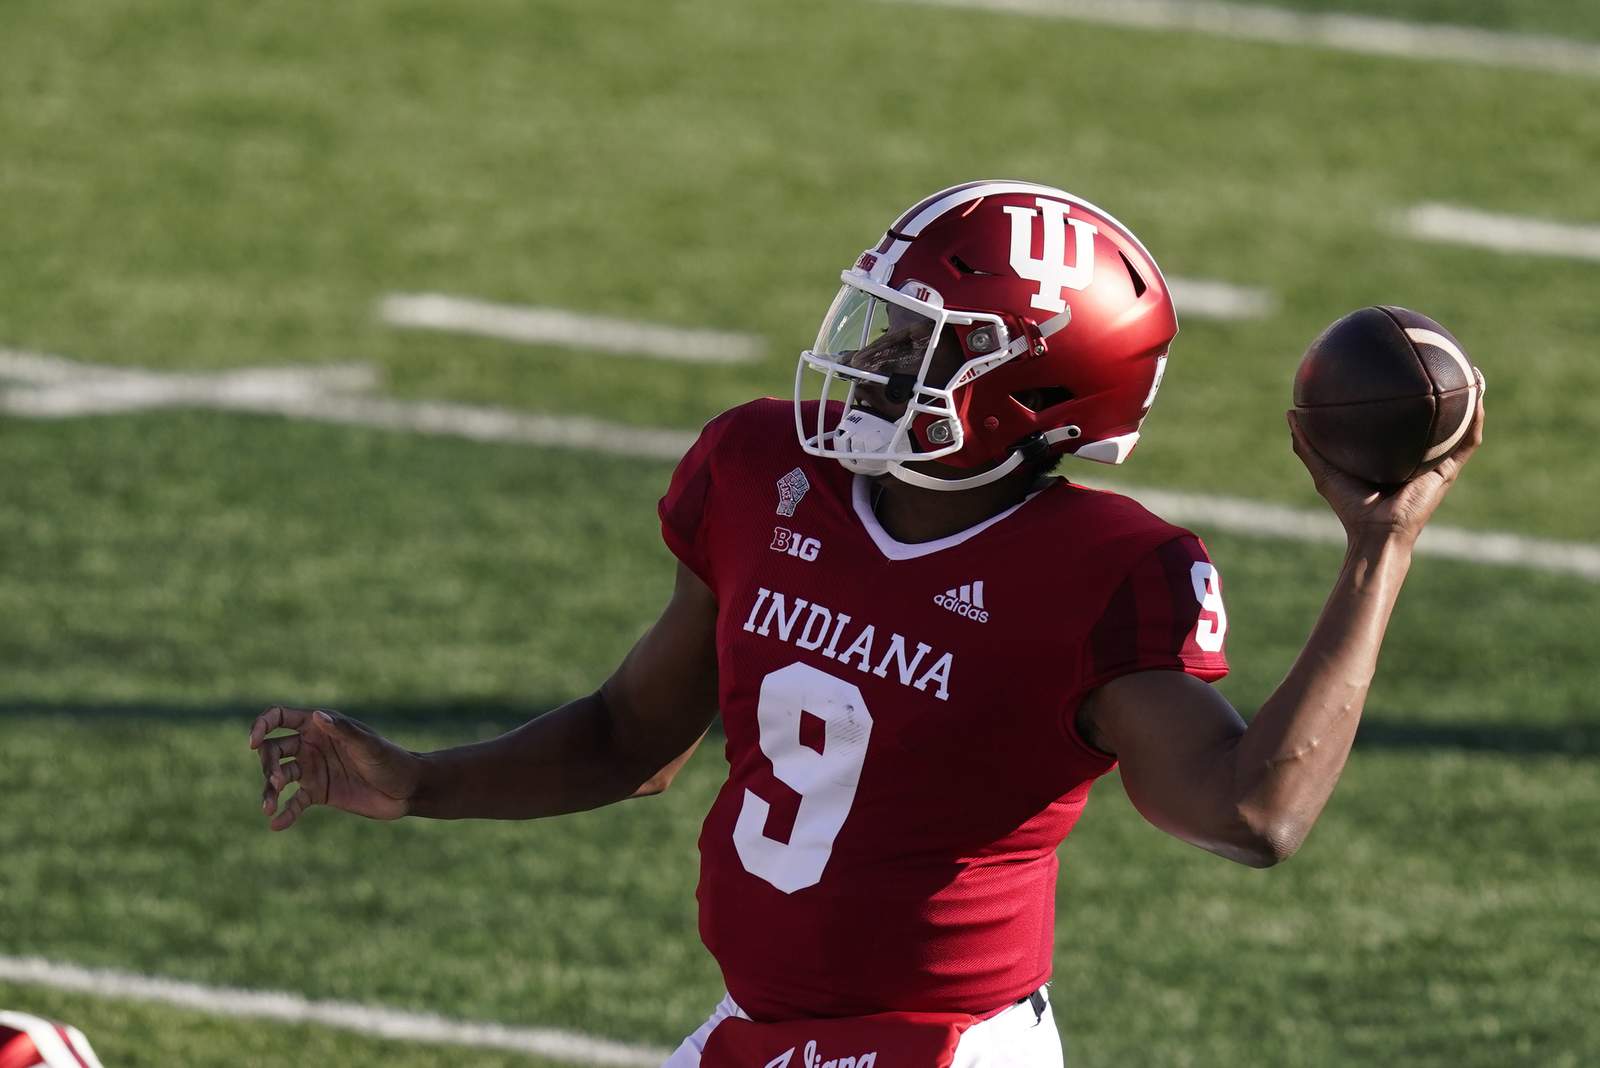 Indiana's OT gamble pay off in upset over No. 8 Penn State